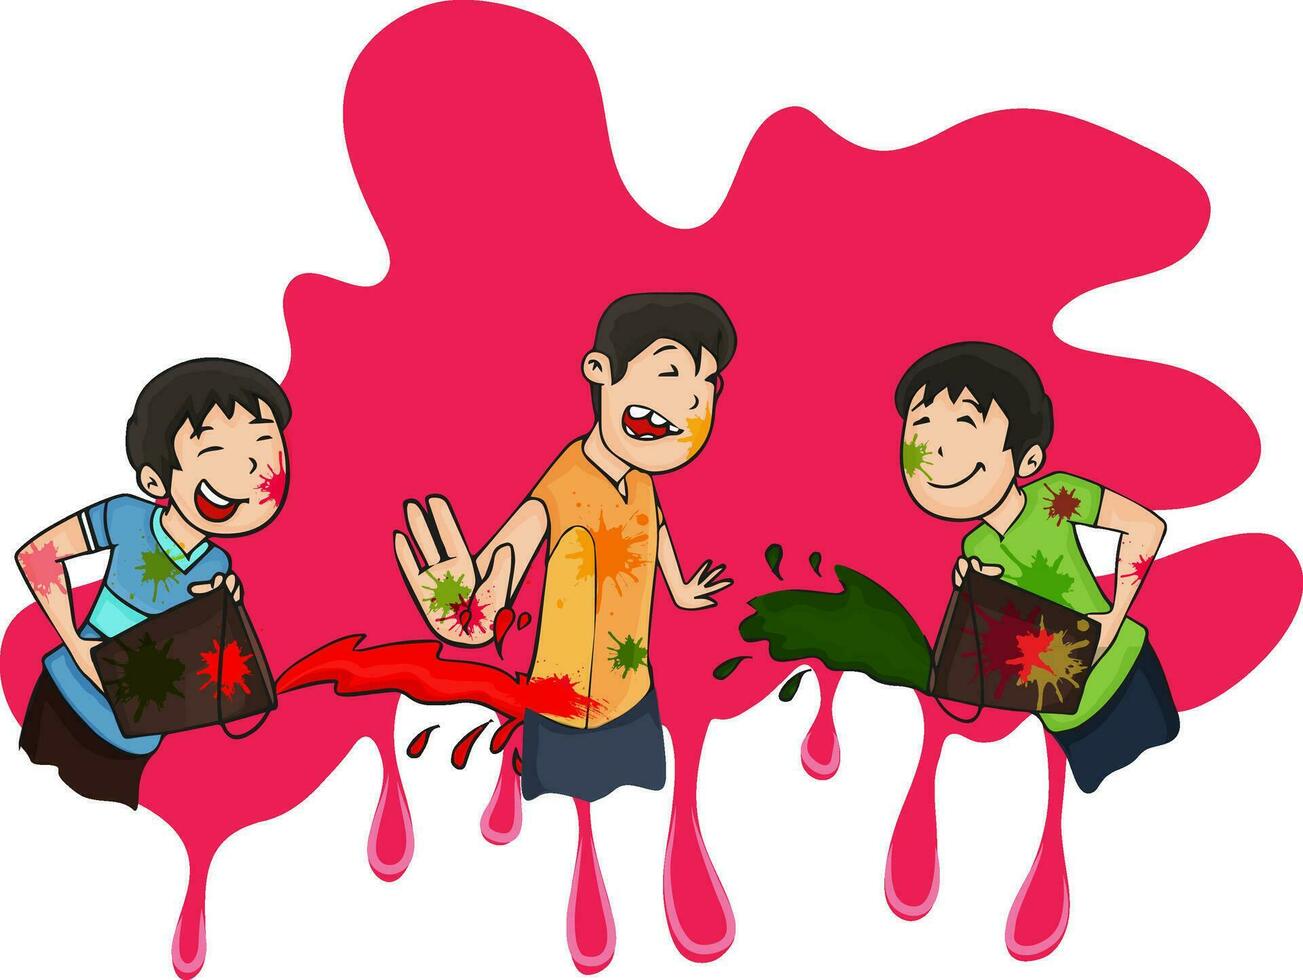 Cute boys playing colors for Holi Festival celebration. vector